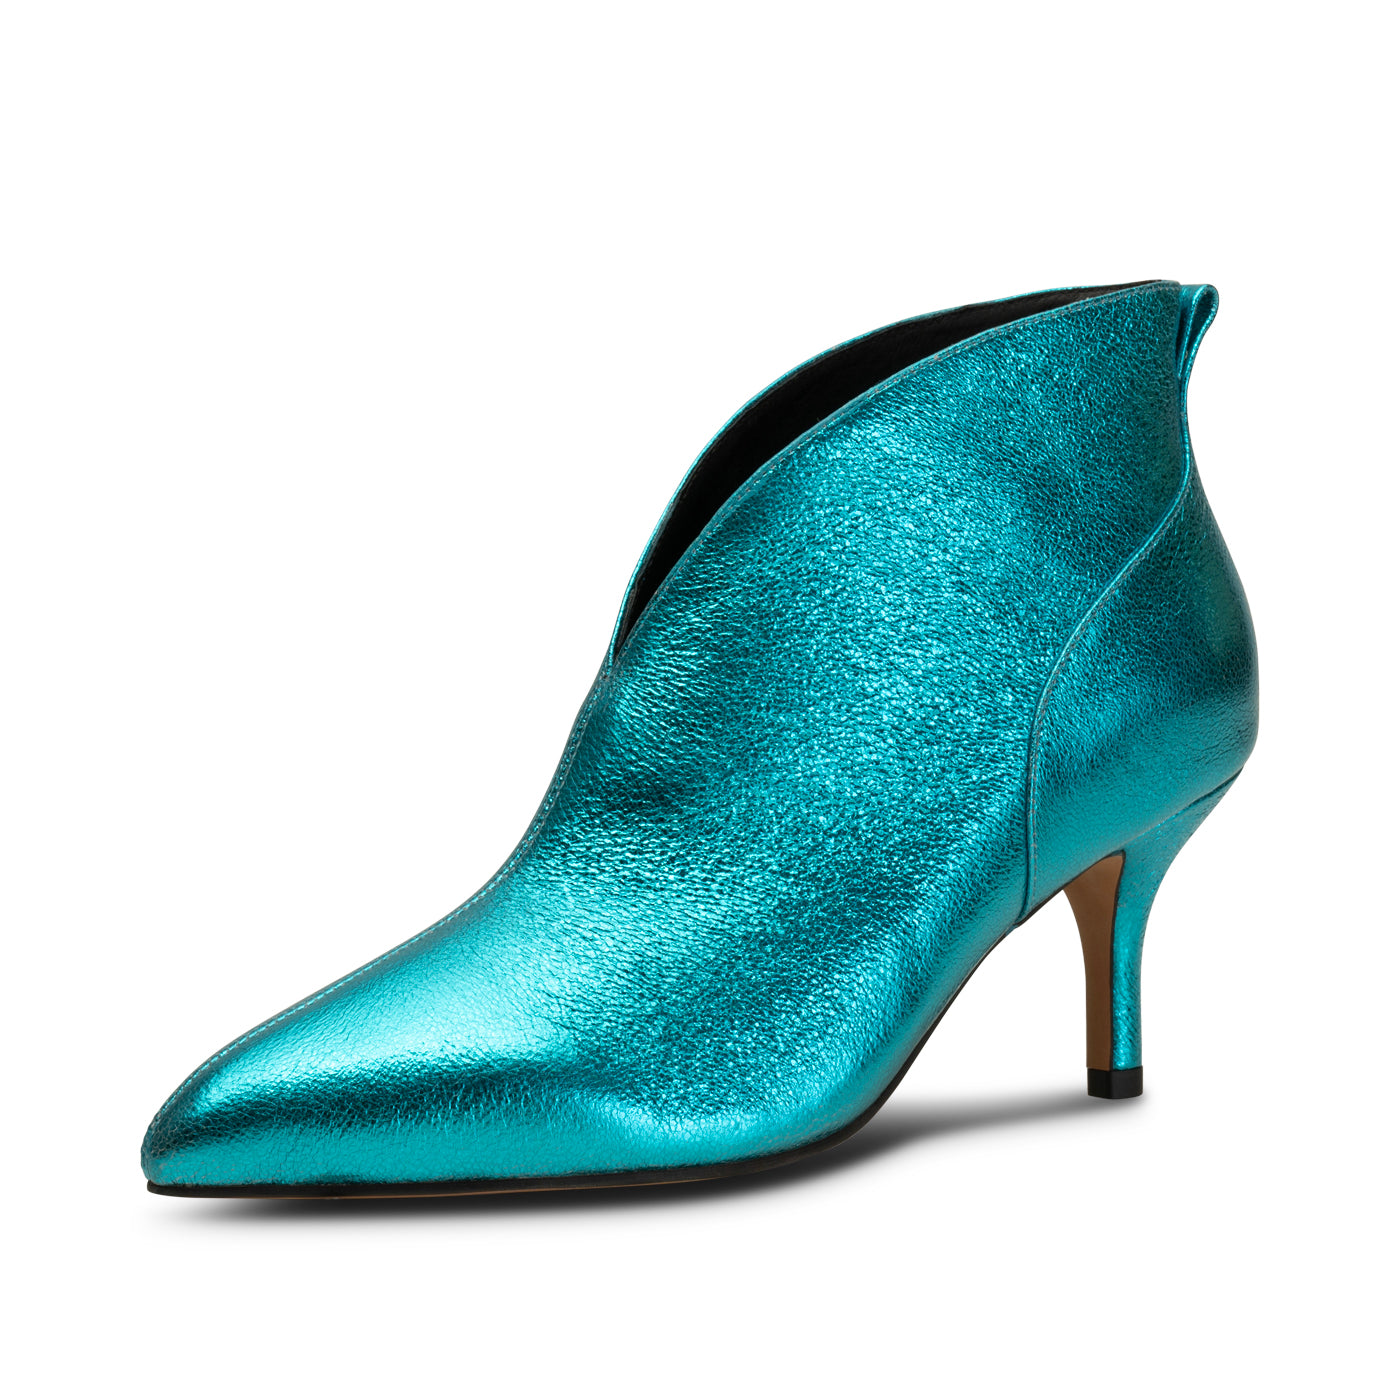 SHOE THE BEAR WOMENS Valentine heel leather Ankle Boots 983 TURQUOISE METALLIC